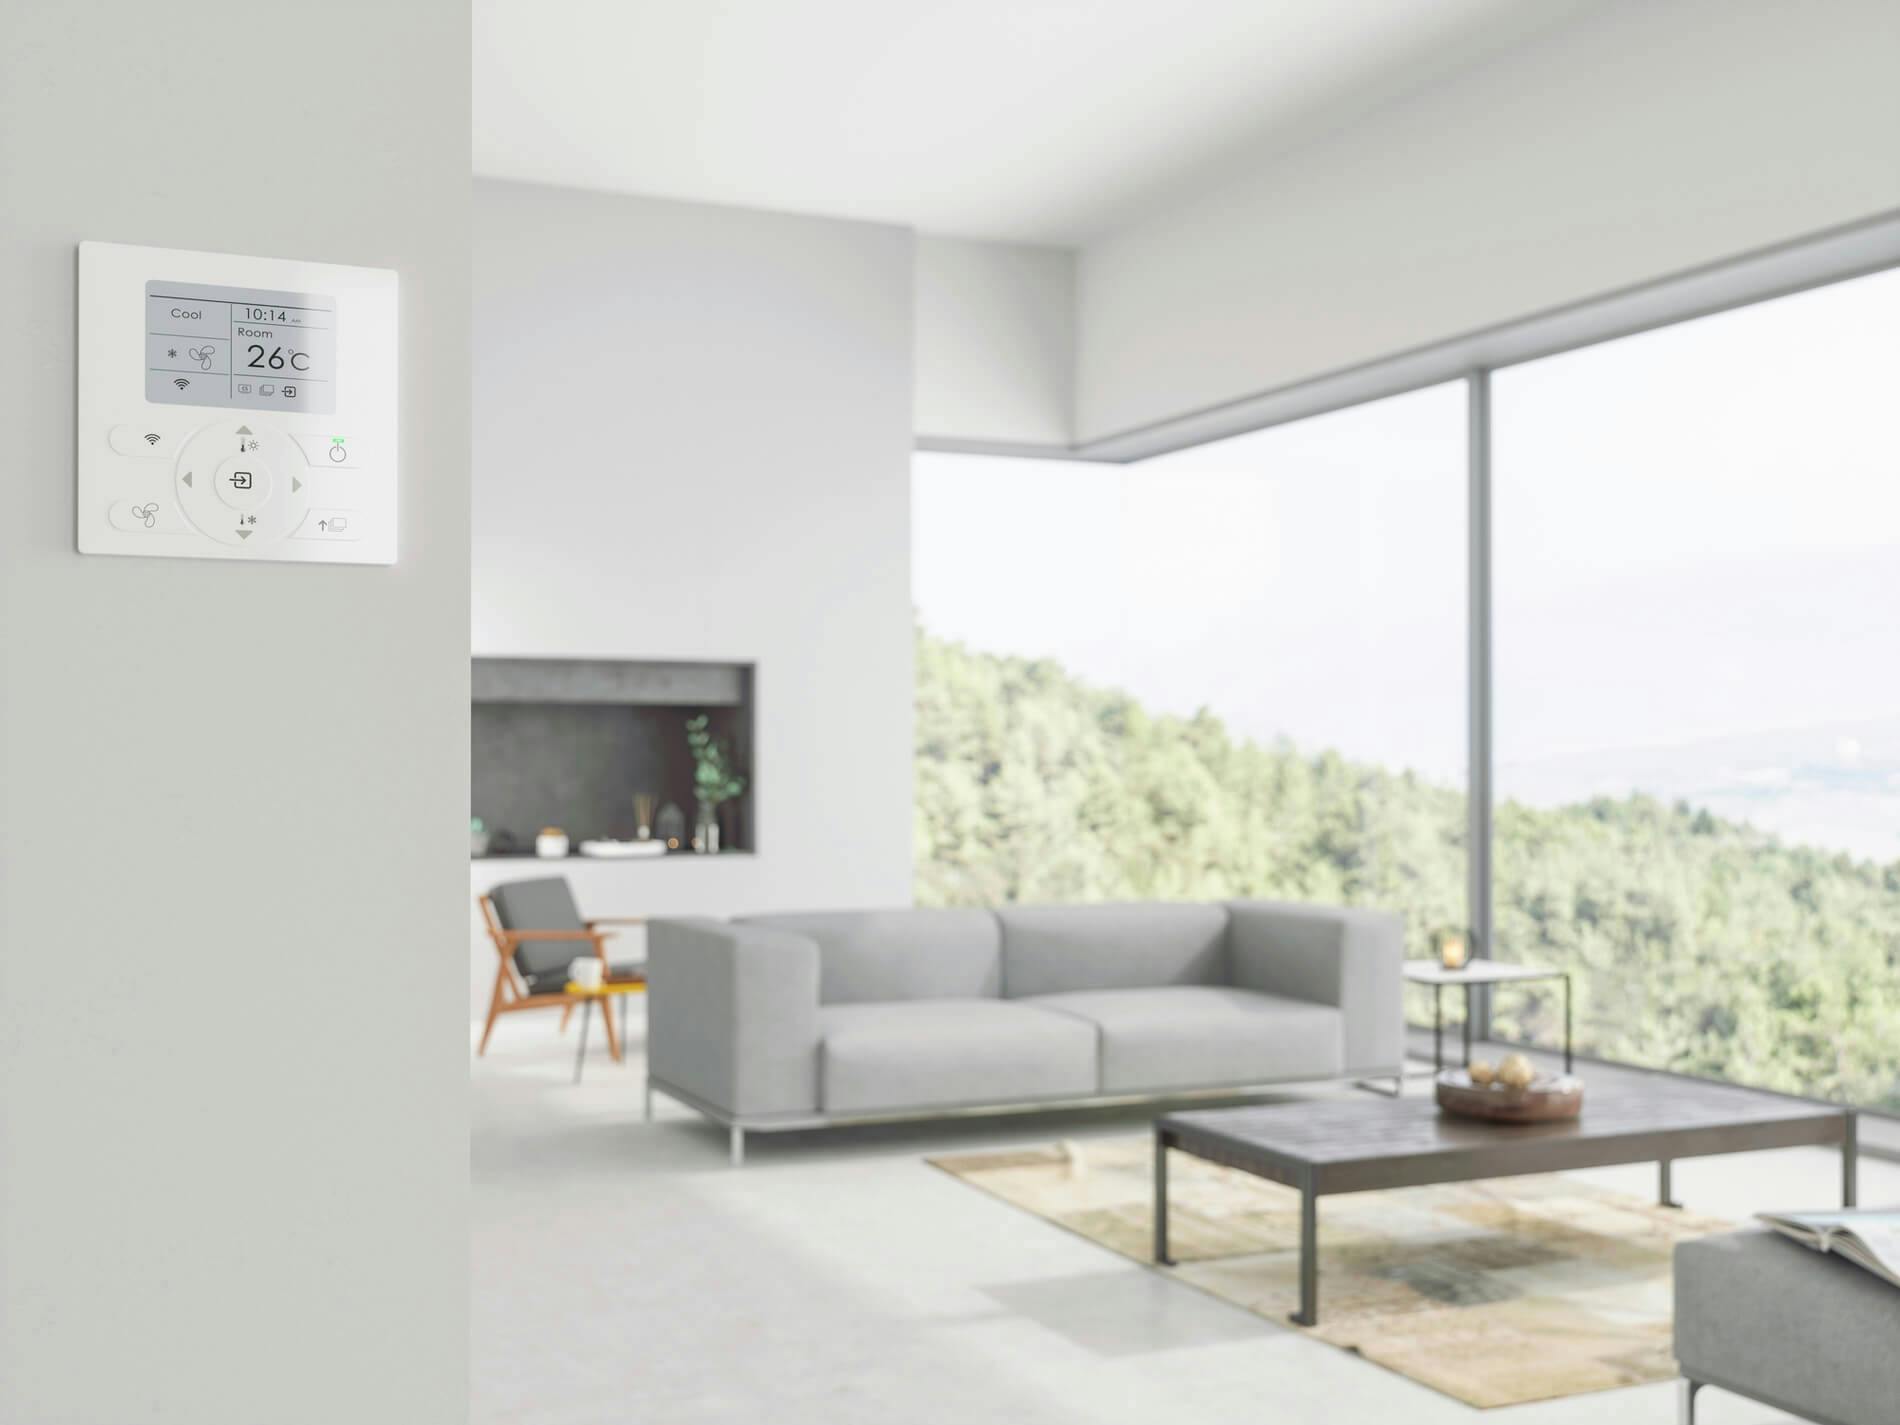 Villas with air conditioning. A temperature control display in front of a grey living room